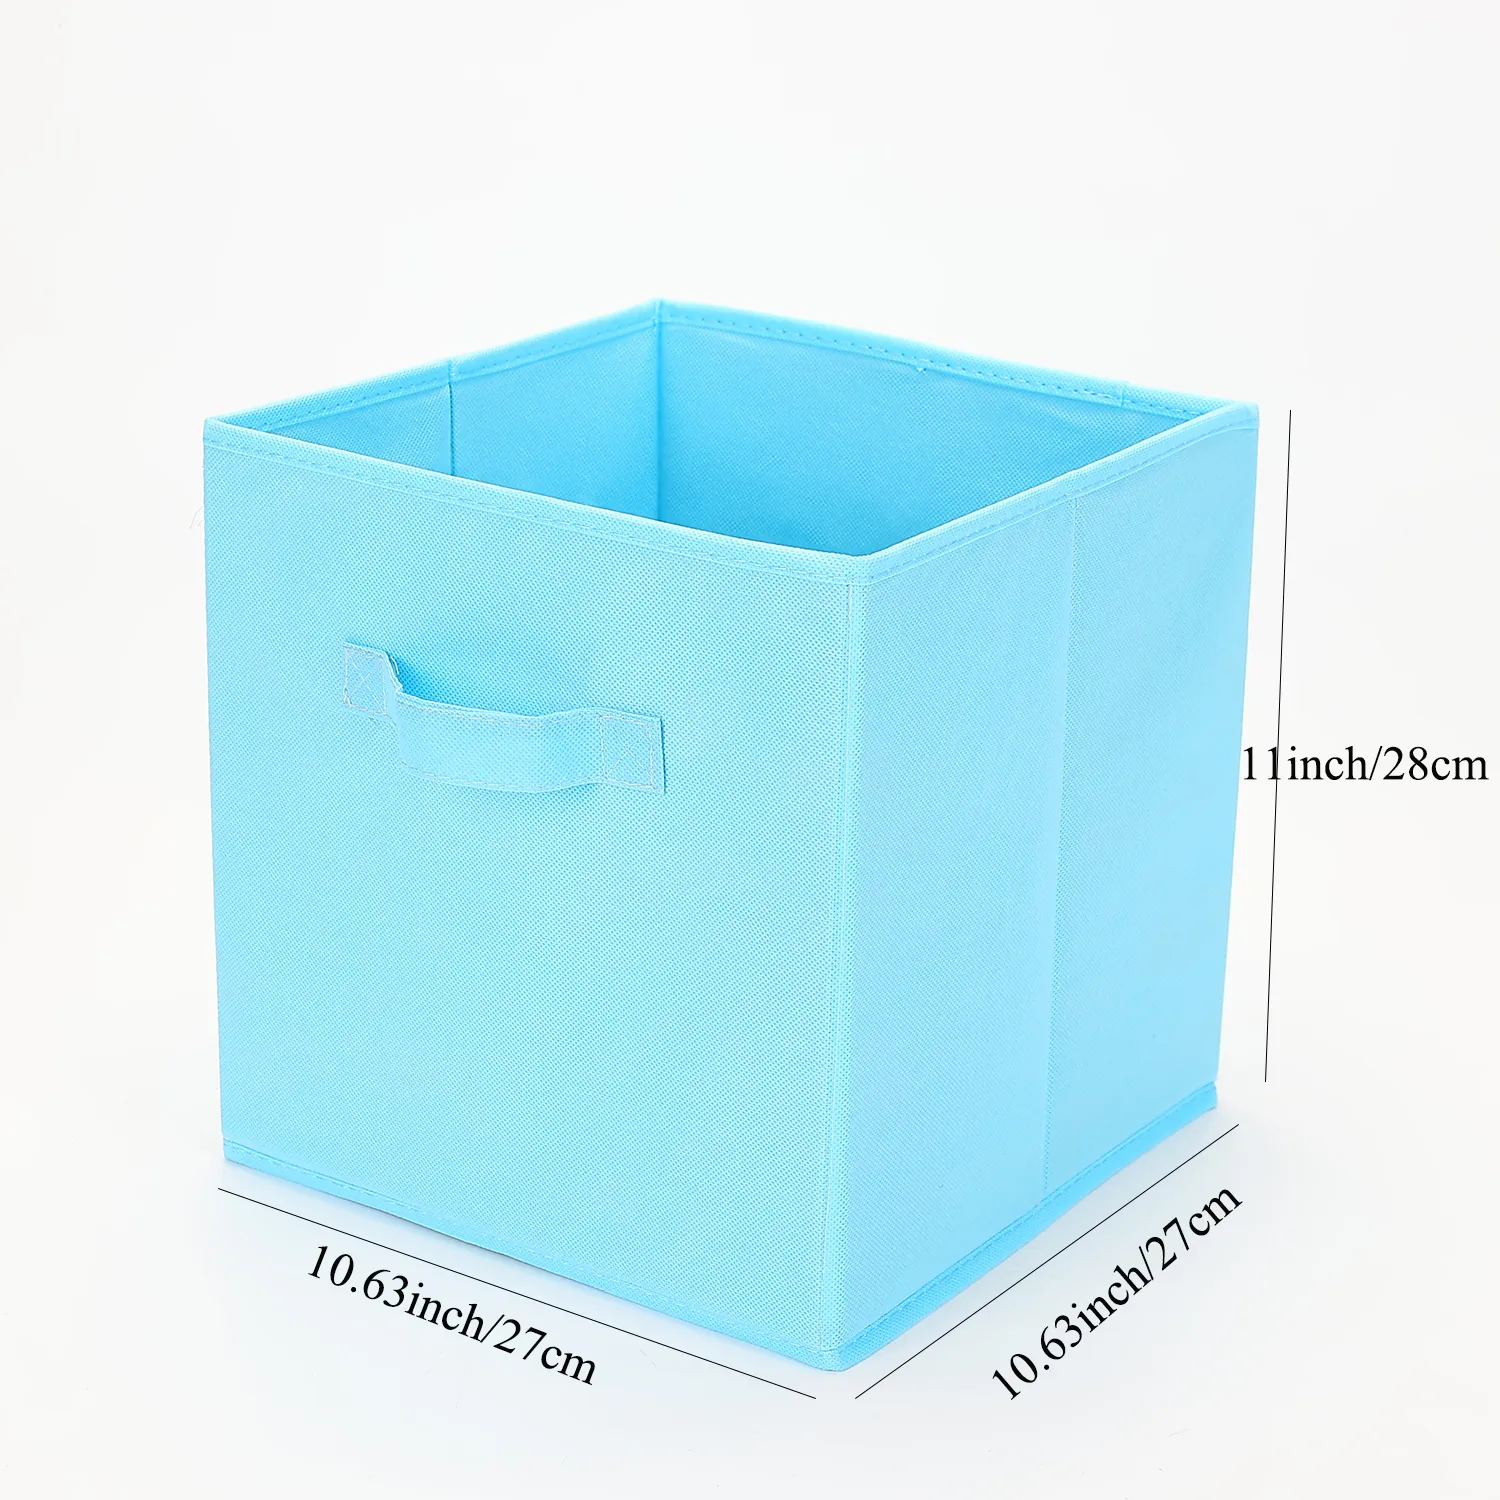 

Collapsible Storage Bins Foldable Fabric Storage Basket Organizer Boxes Containers Handles for Nursery Toys, Kids Room, Clothes, Towels, Magazine